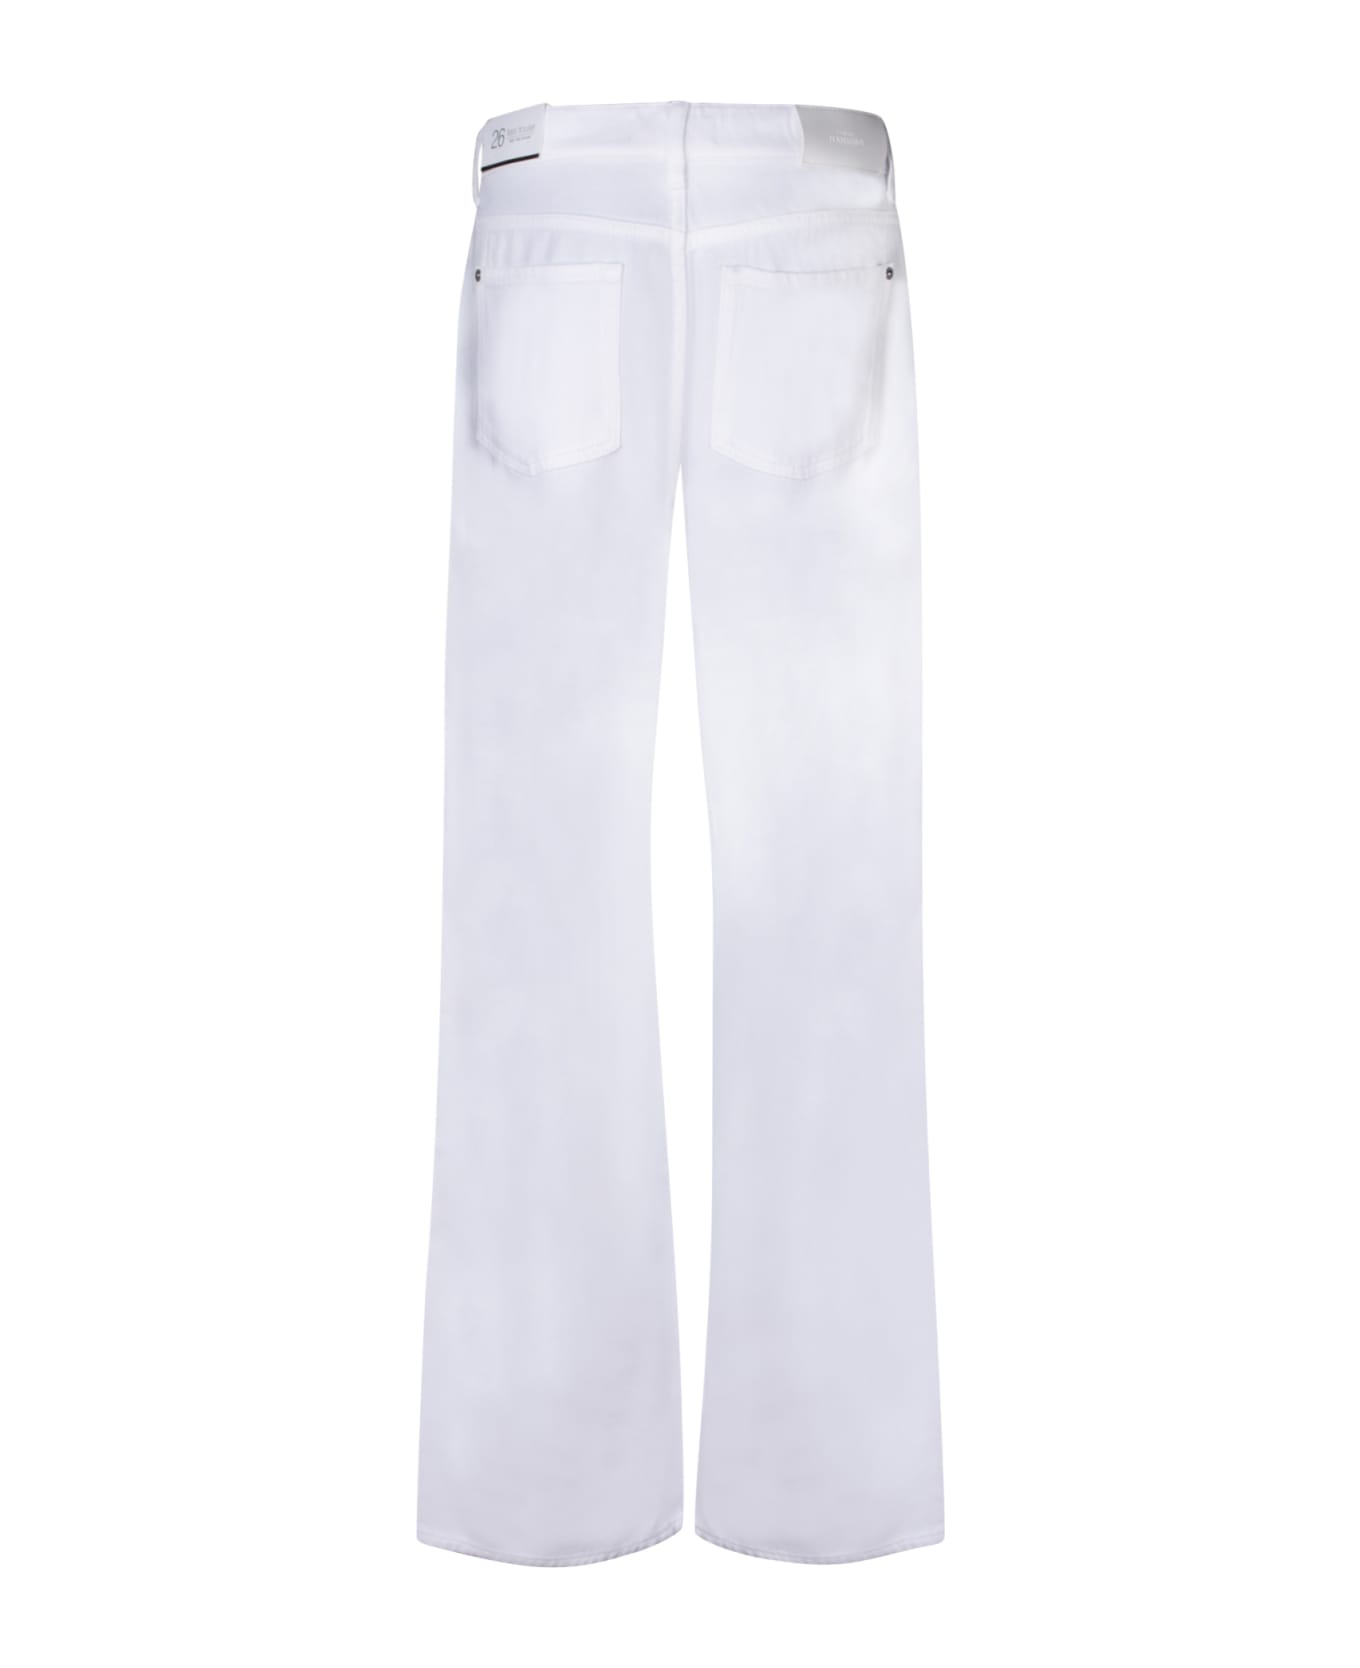 7 For All Mankind Tess Tencel White Jeans - White